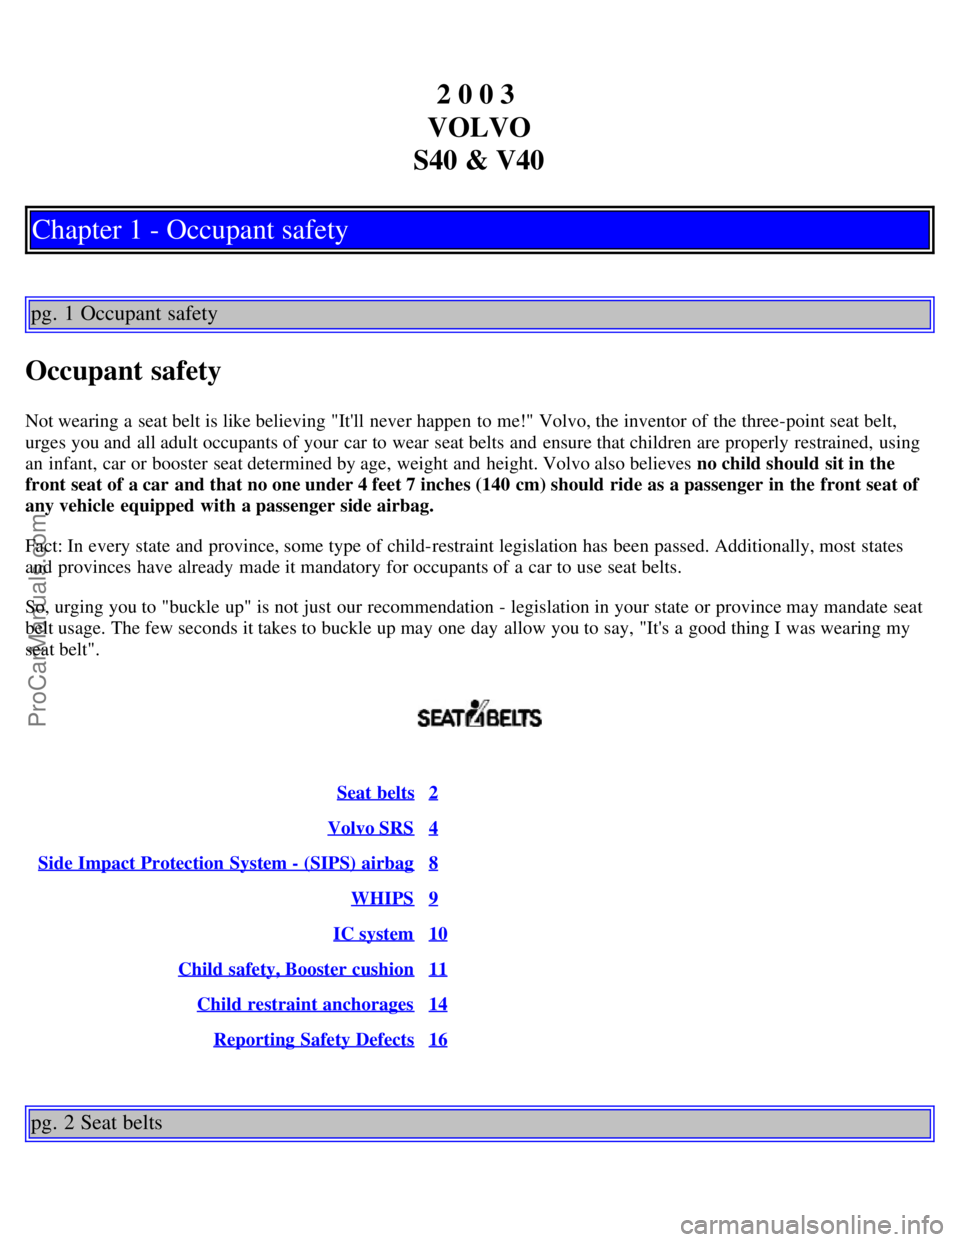 VOLVO V4 2003  Owners Manual 2 0 0 3 
VOLVO
S40 & V40
Chapter 1 - Occupant safety
pg. 1 Occupant safety
Occupant safety
Not wearing a  seat belt is like believing "Itll  never happen to me!" Volvo, the inventor of the three-poin